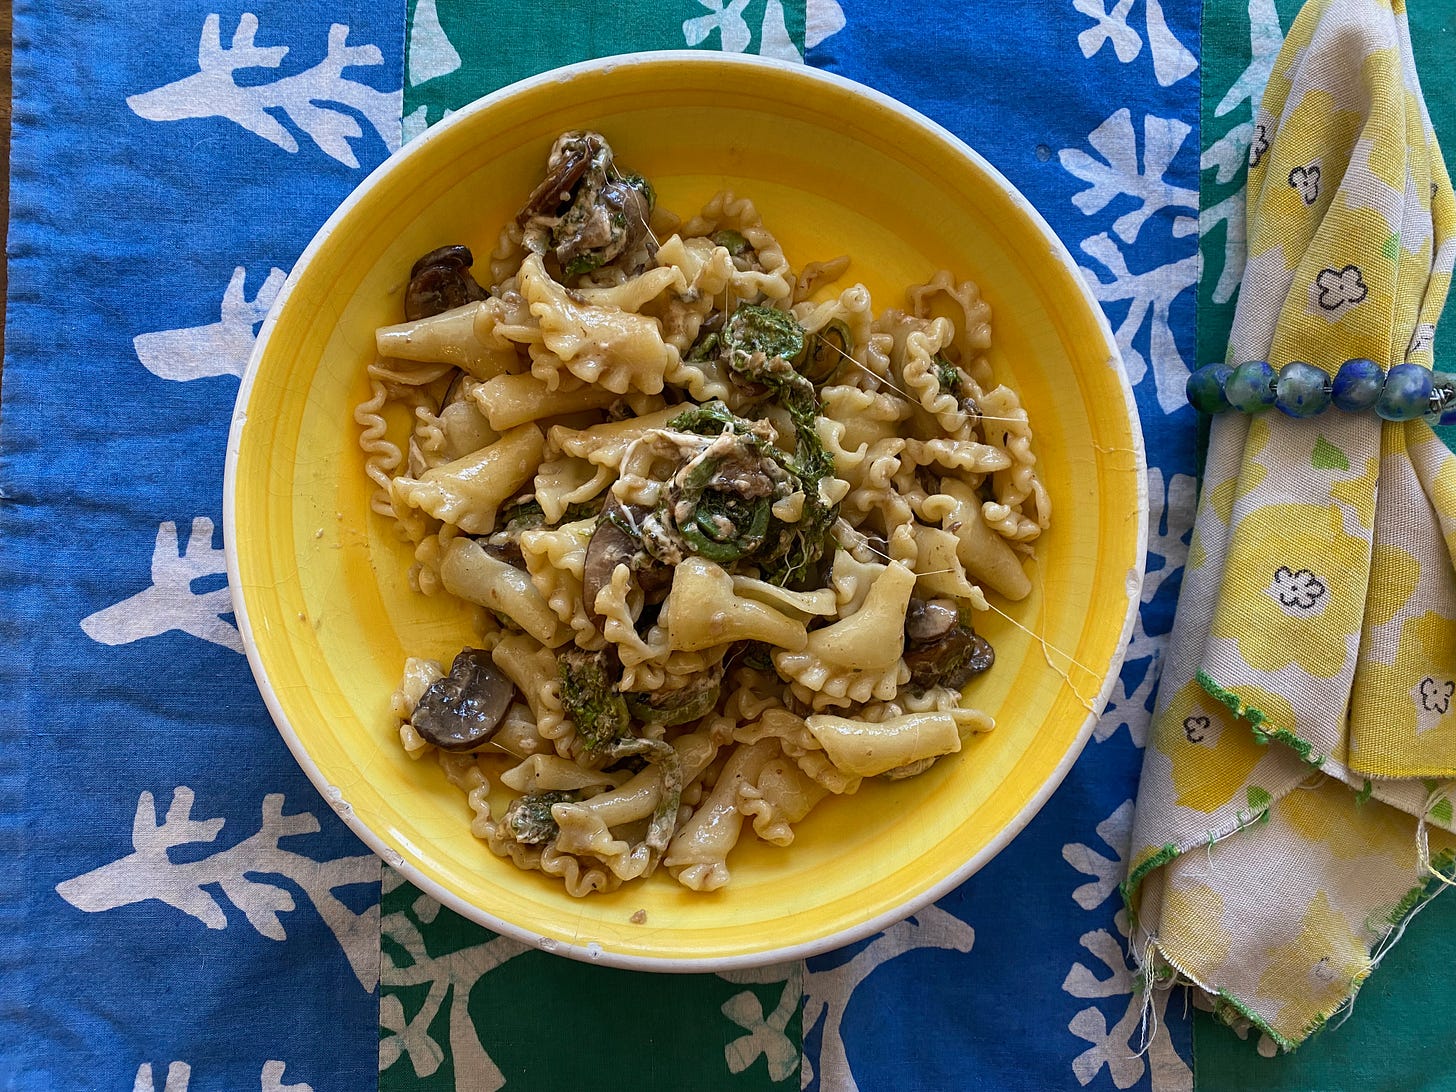 A shallow yellow bowl of cheesy pasta, mushrooms, and fiddlehead ferns sits on a blue and green placemat next to a yellow cloth napkin.